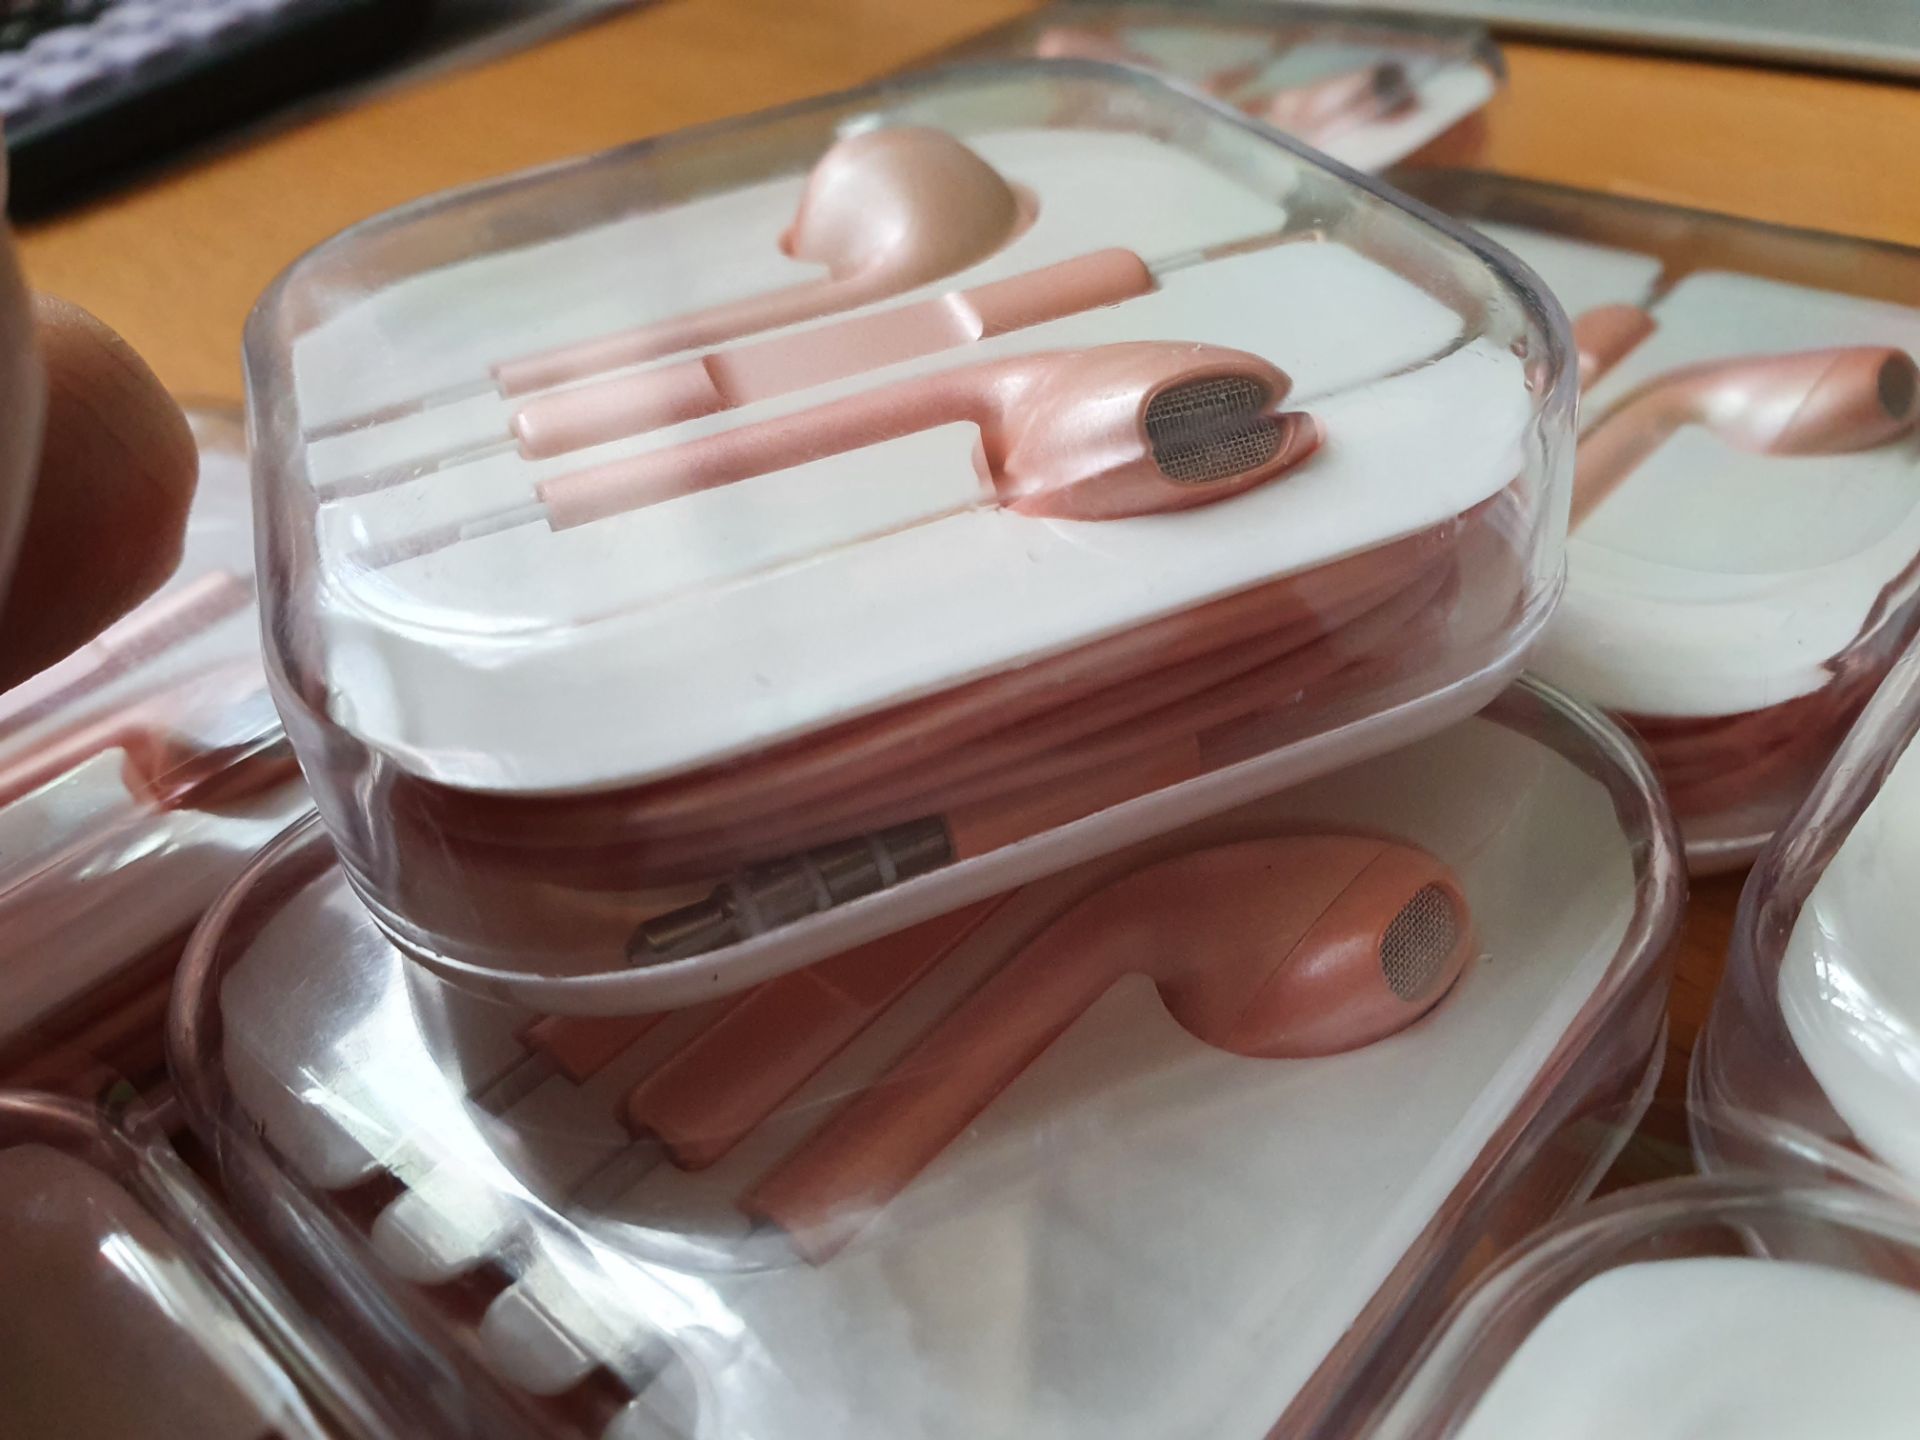 10 x new rose gold earphones rrp £50 pwerfect xmas gifts - Image 3 of 4